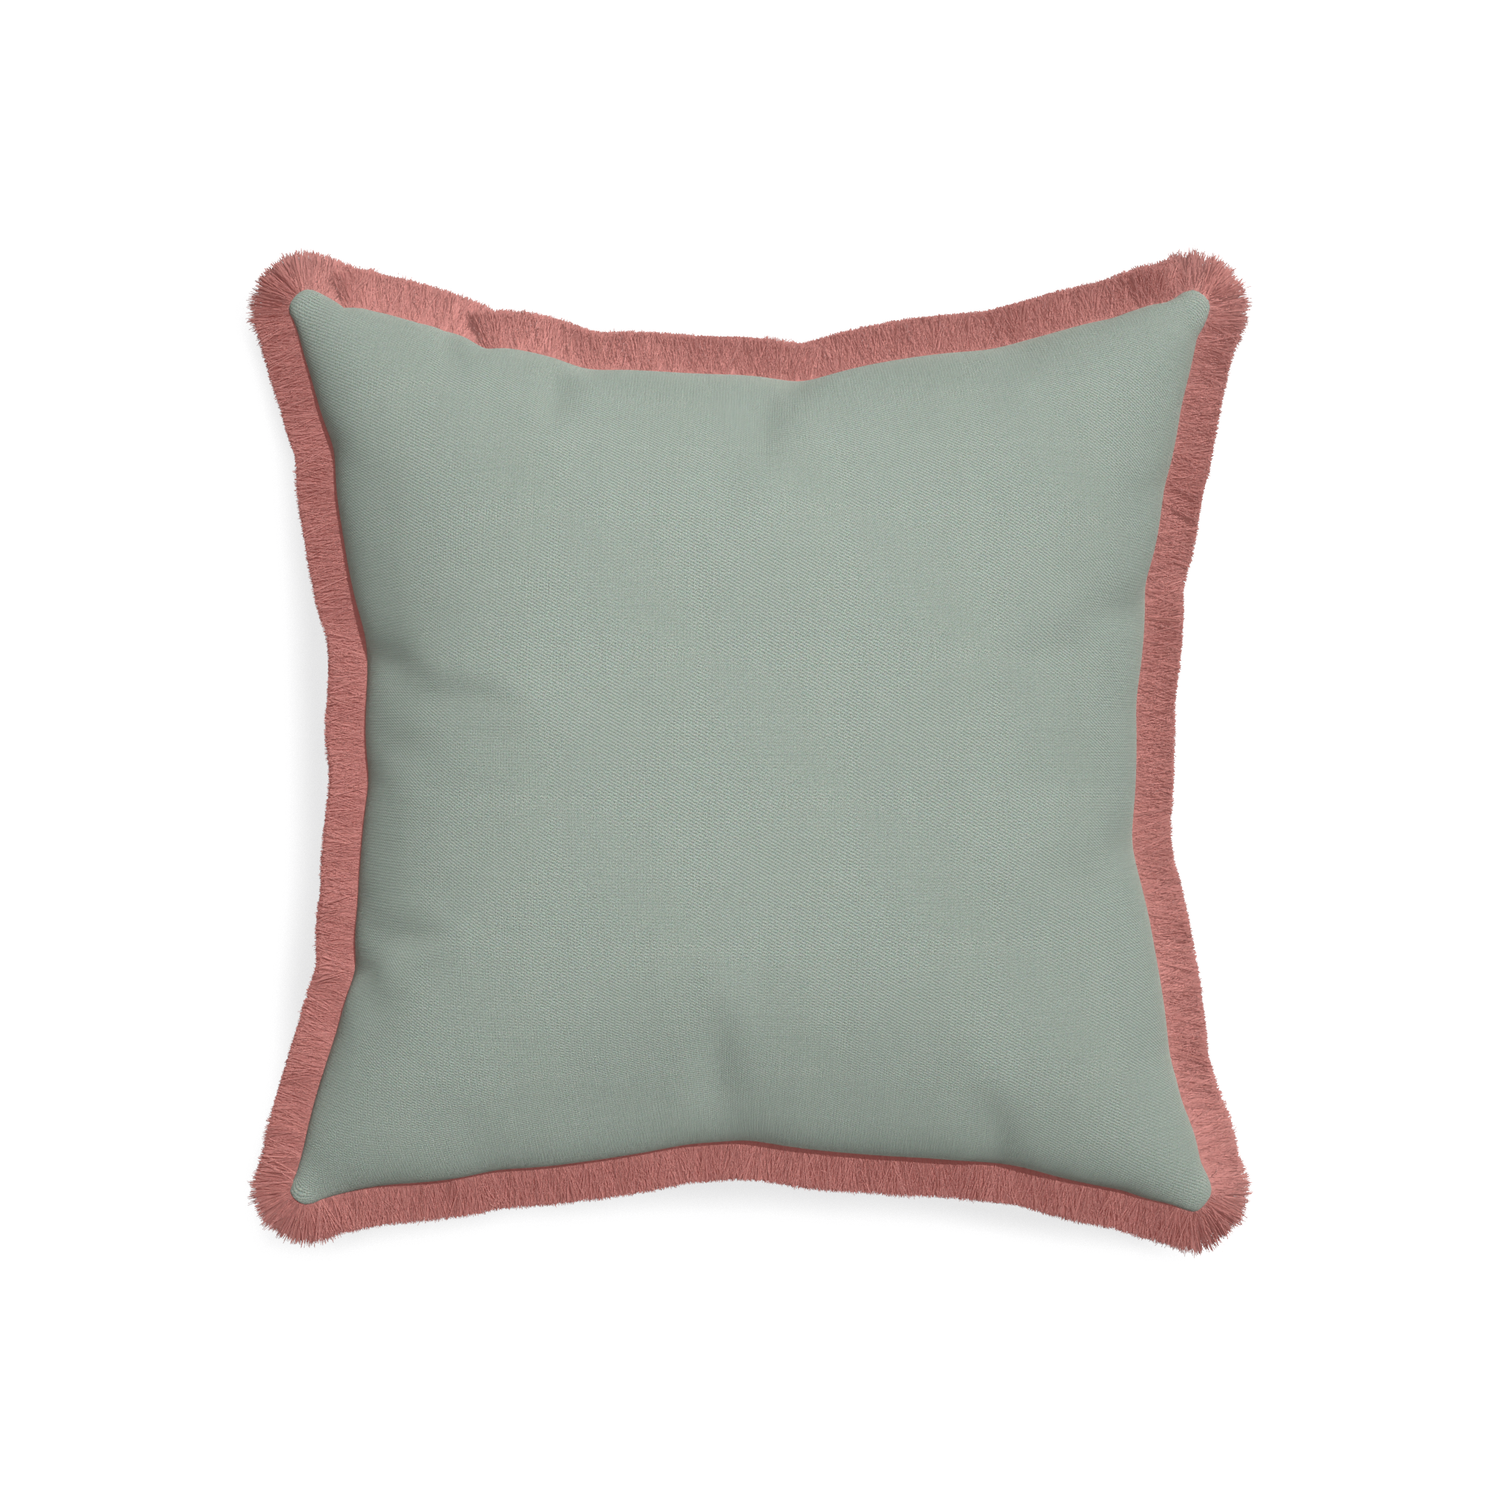 20-square sage custom sage green cottonpillow with d fringe on white background